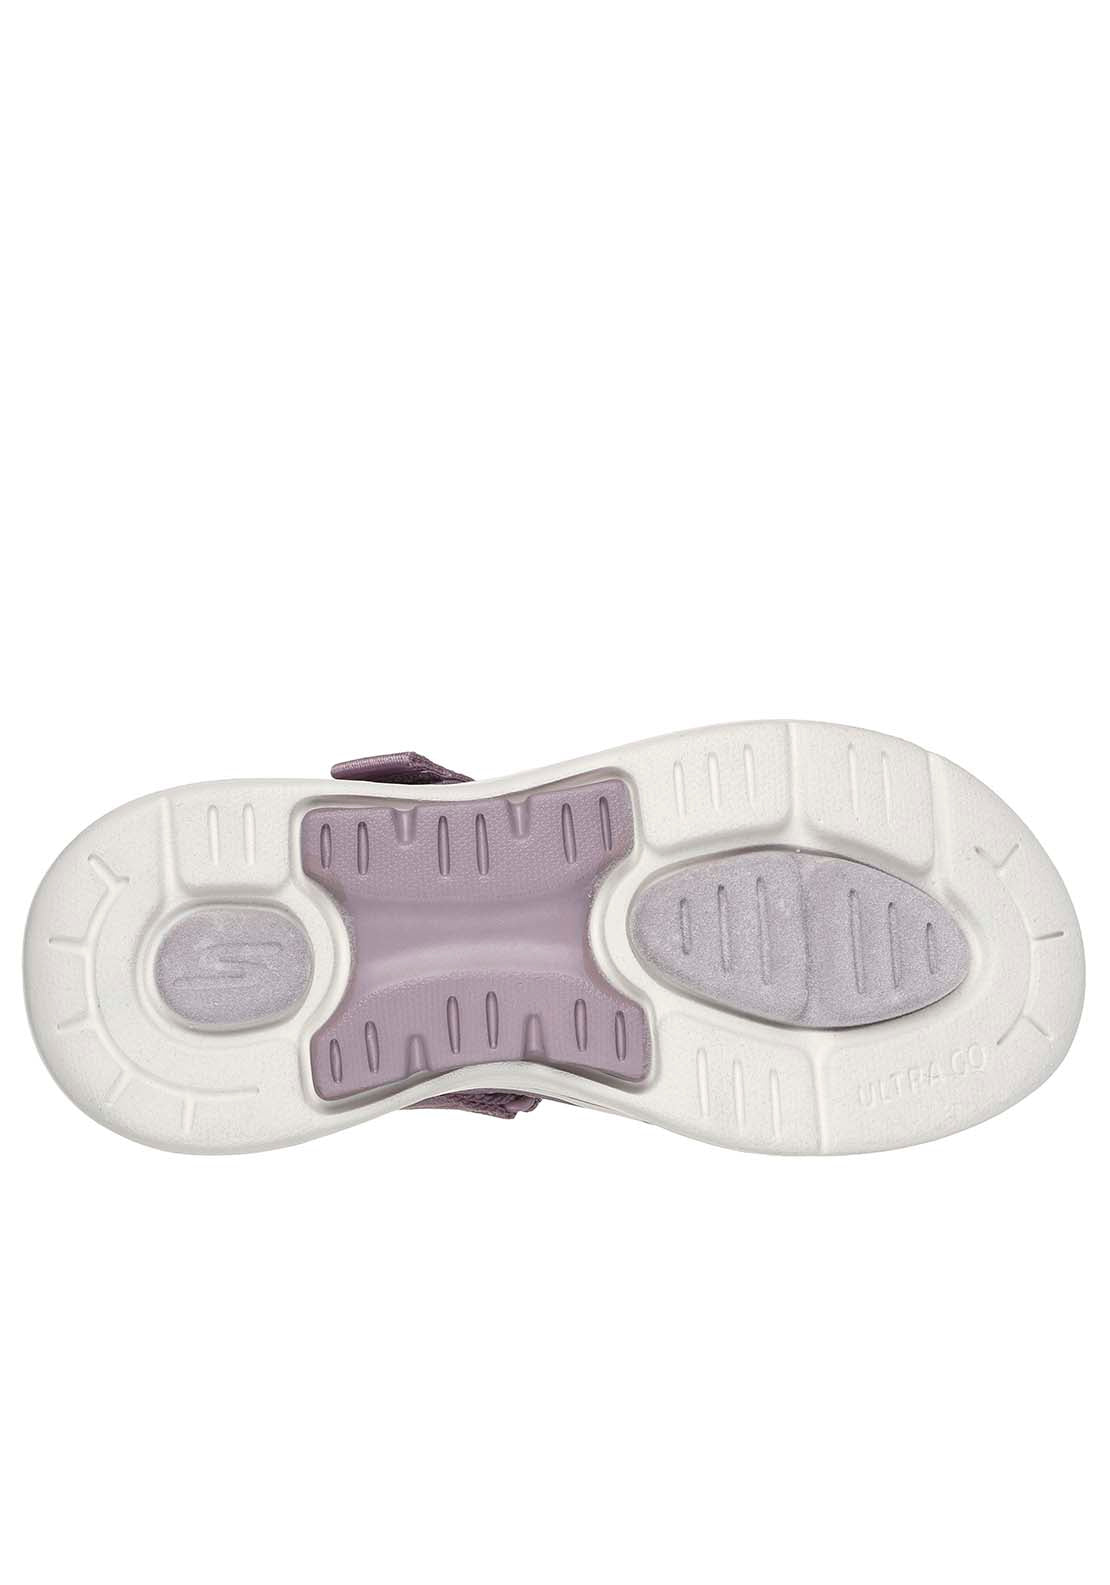 Skechers Go Walk Arch Fit Sandal 5 Shaws Department Stores